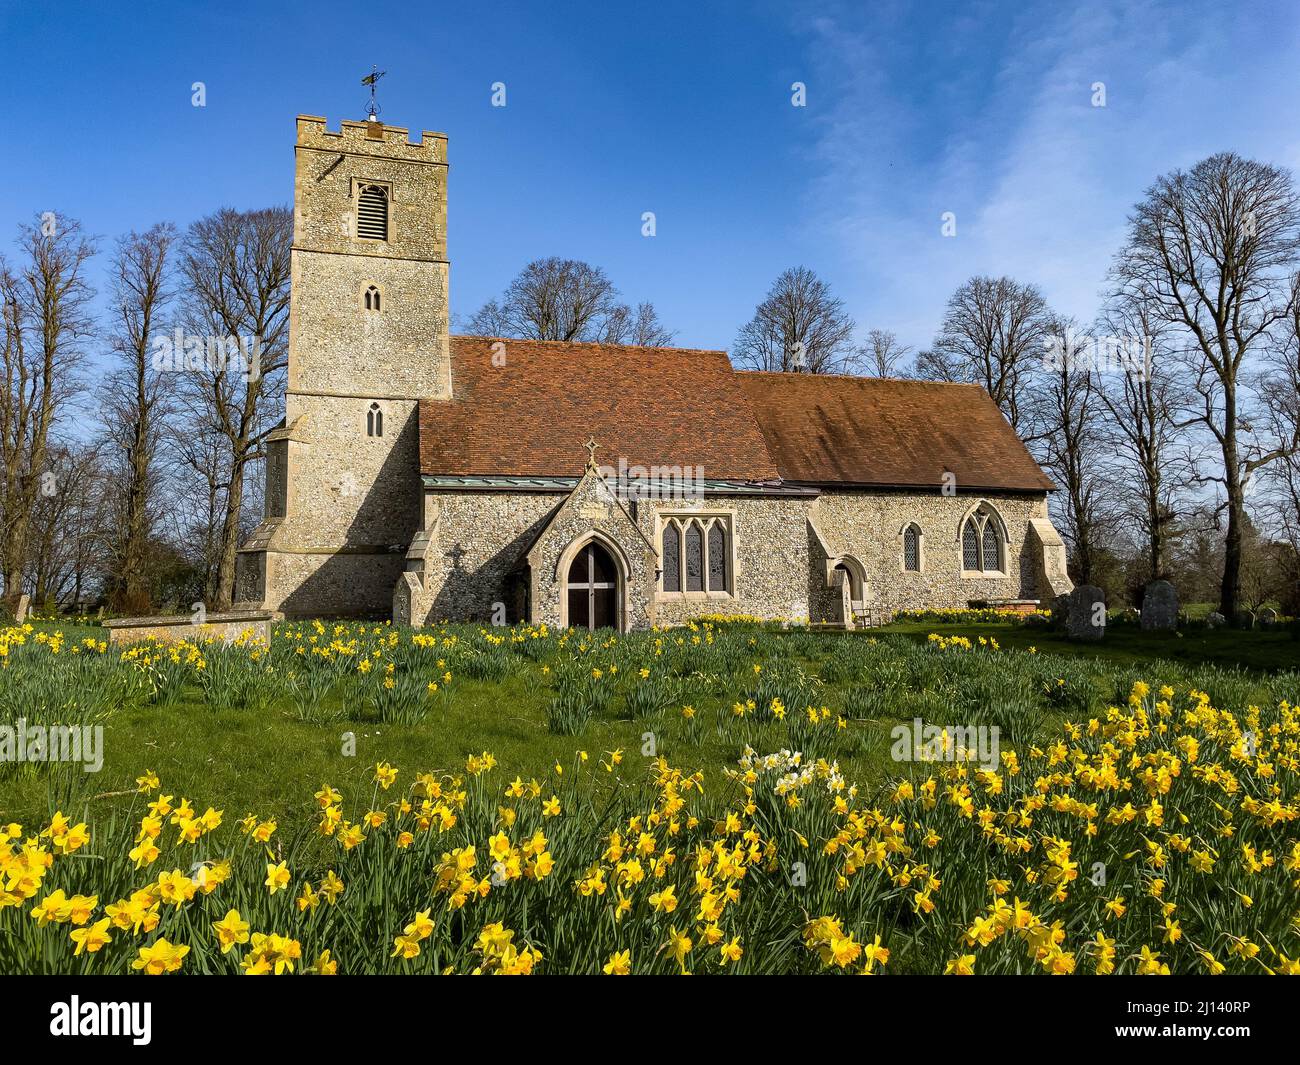 Field of Daffodils in bloom in front of  All Saints  Church Rickling, Essex UK against a clear blue sky, Essex, UK. Stock Photo